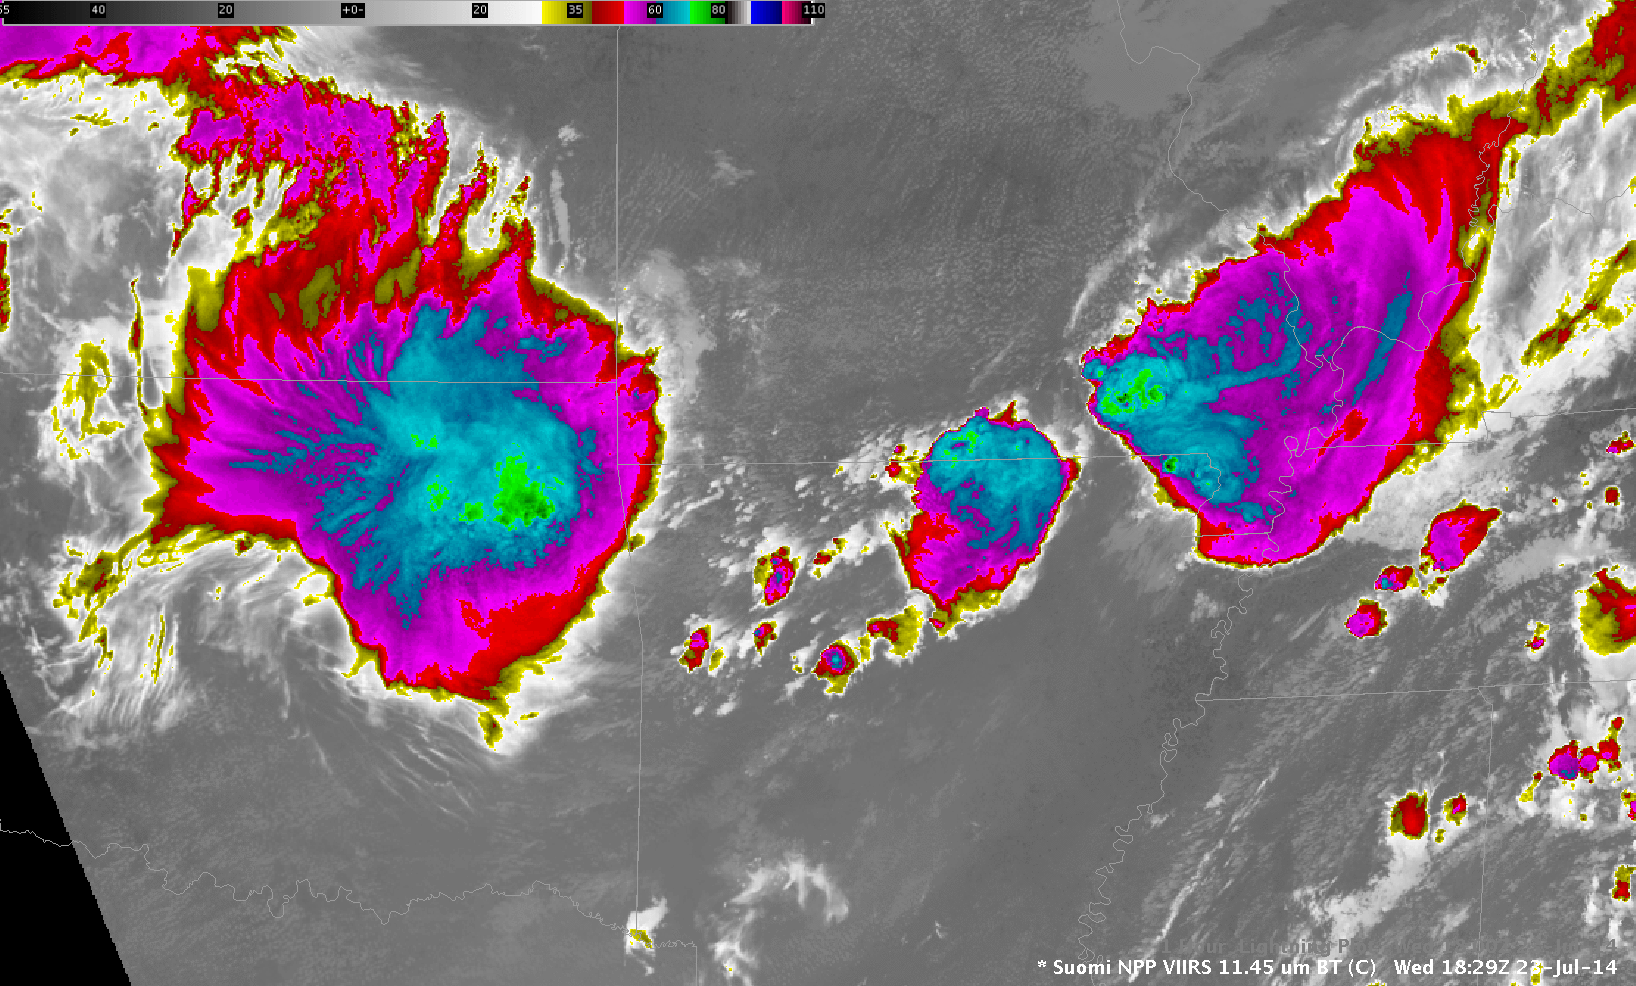 Suomi NPP VIIRS 11.35 µm infrared channel images (click to enlarge)